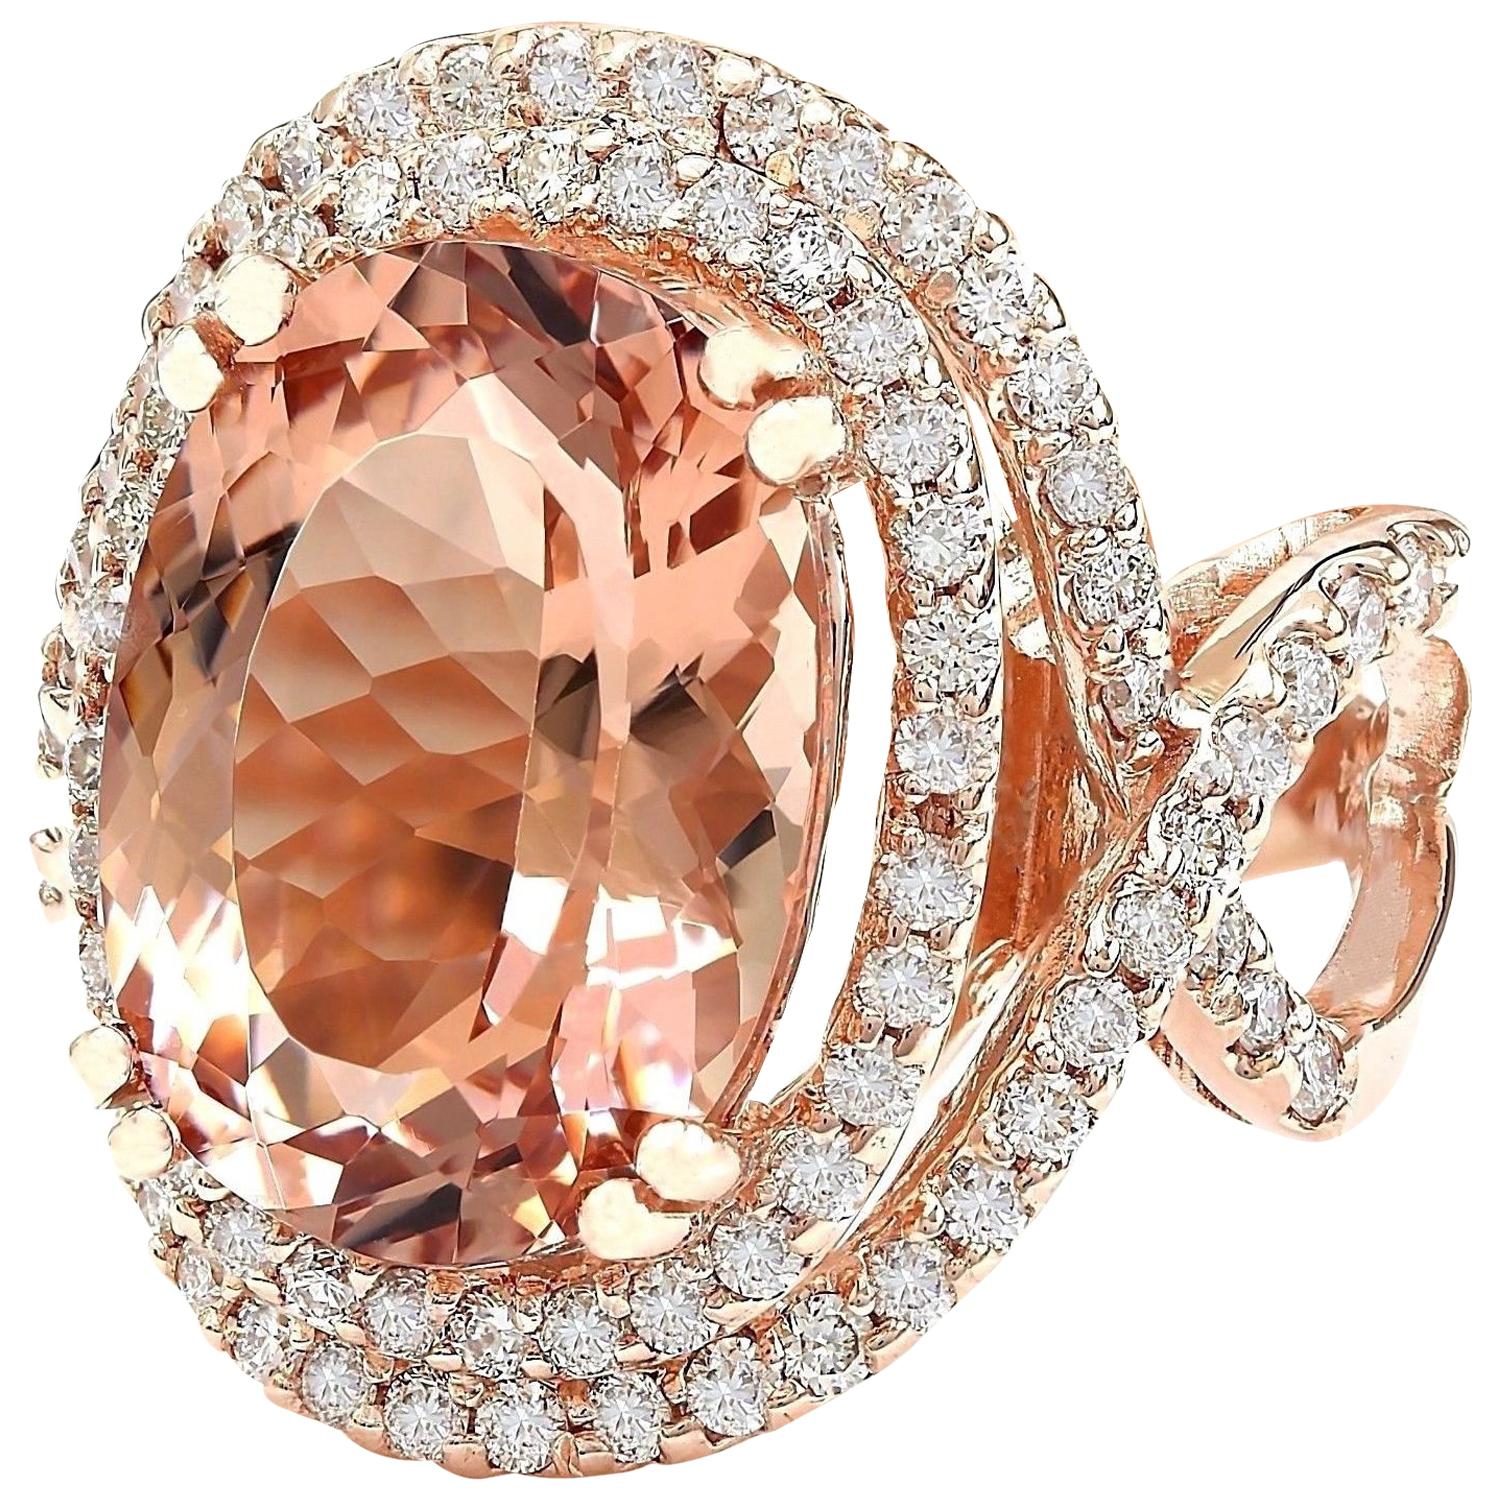 11.51 Carat Natural Morganite 14K Solid Rose Gold Diamond Ring
 Item Type: Ring
 Item Style: Cocktail
 Material: 14K Rose Gold
 Mainstone: Morganite
 Stone Color: Peach
 Stone Weight: 10.11 Carat
 Stone Shape: Oval
 Stone Quantity: 1
 Stone